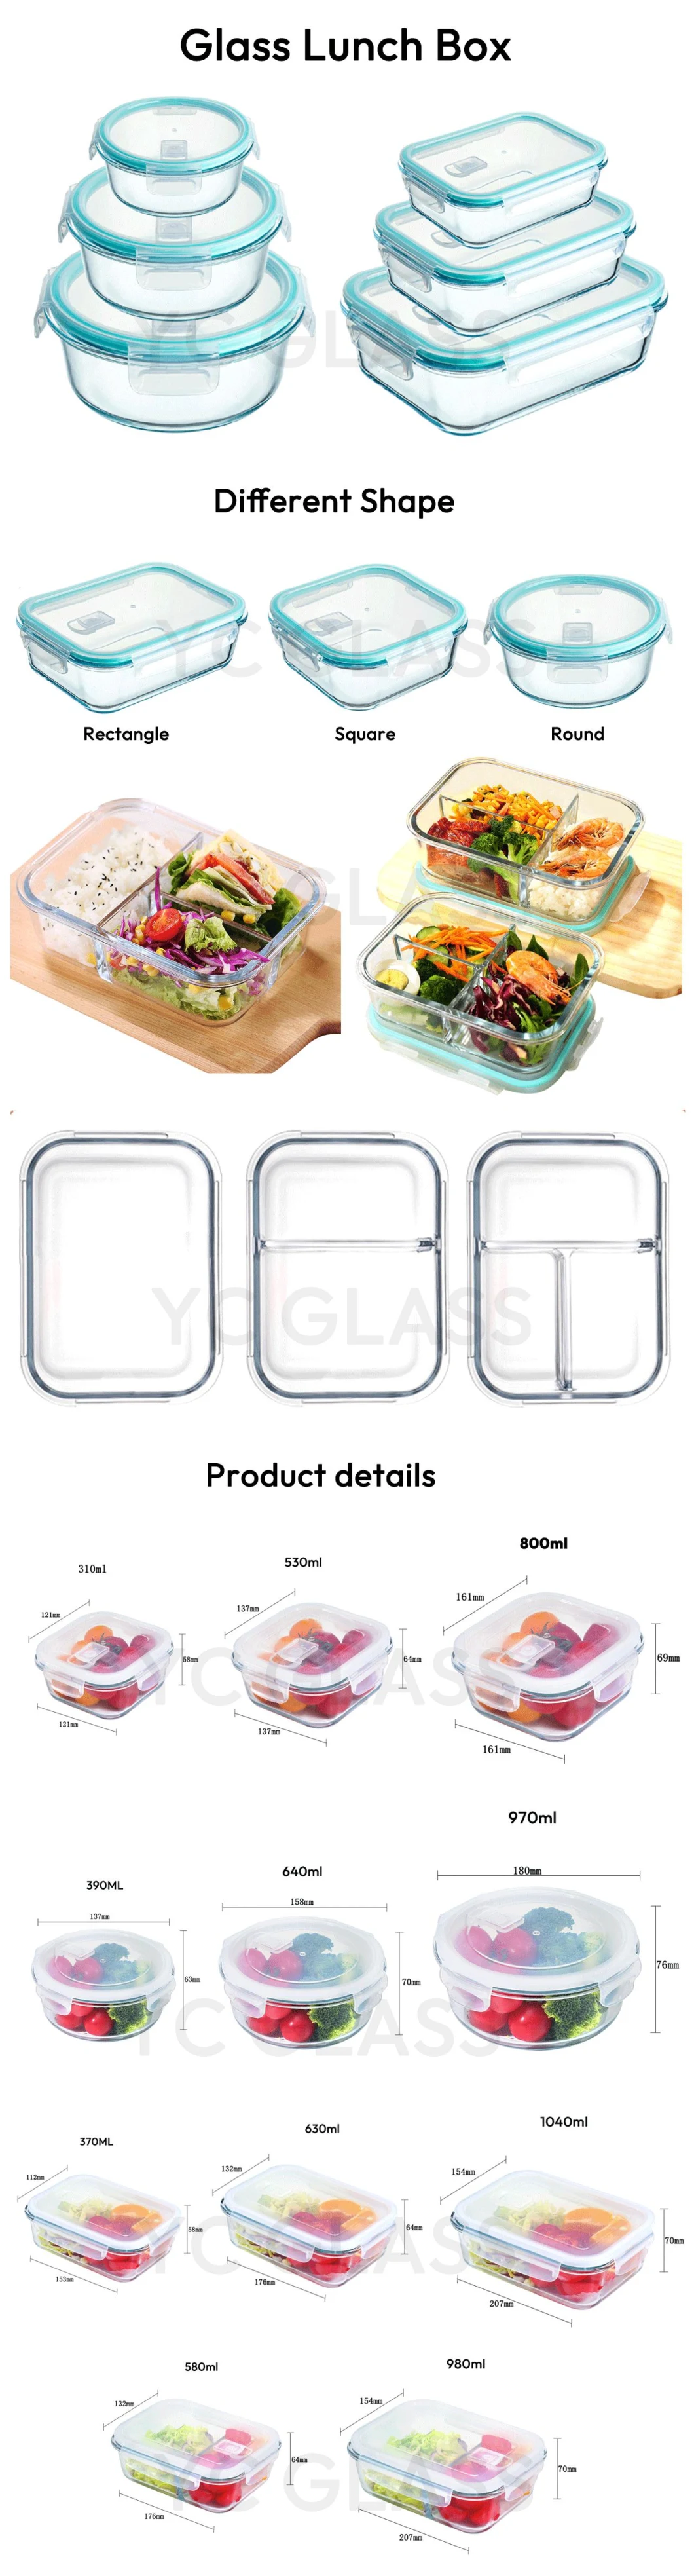 370ml 640ml 800ml 1040ml 1200ml Wholesale Personal Lunch Box Glass Microwave Safe with PP Lid